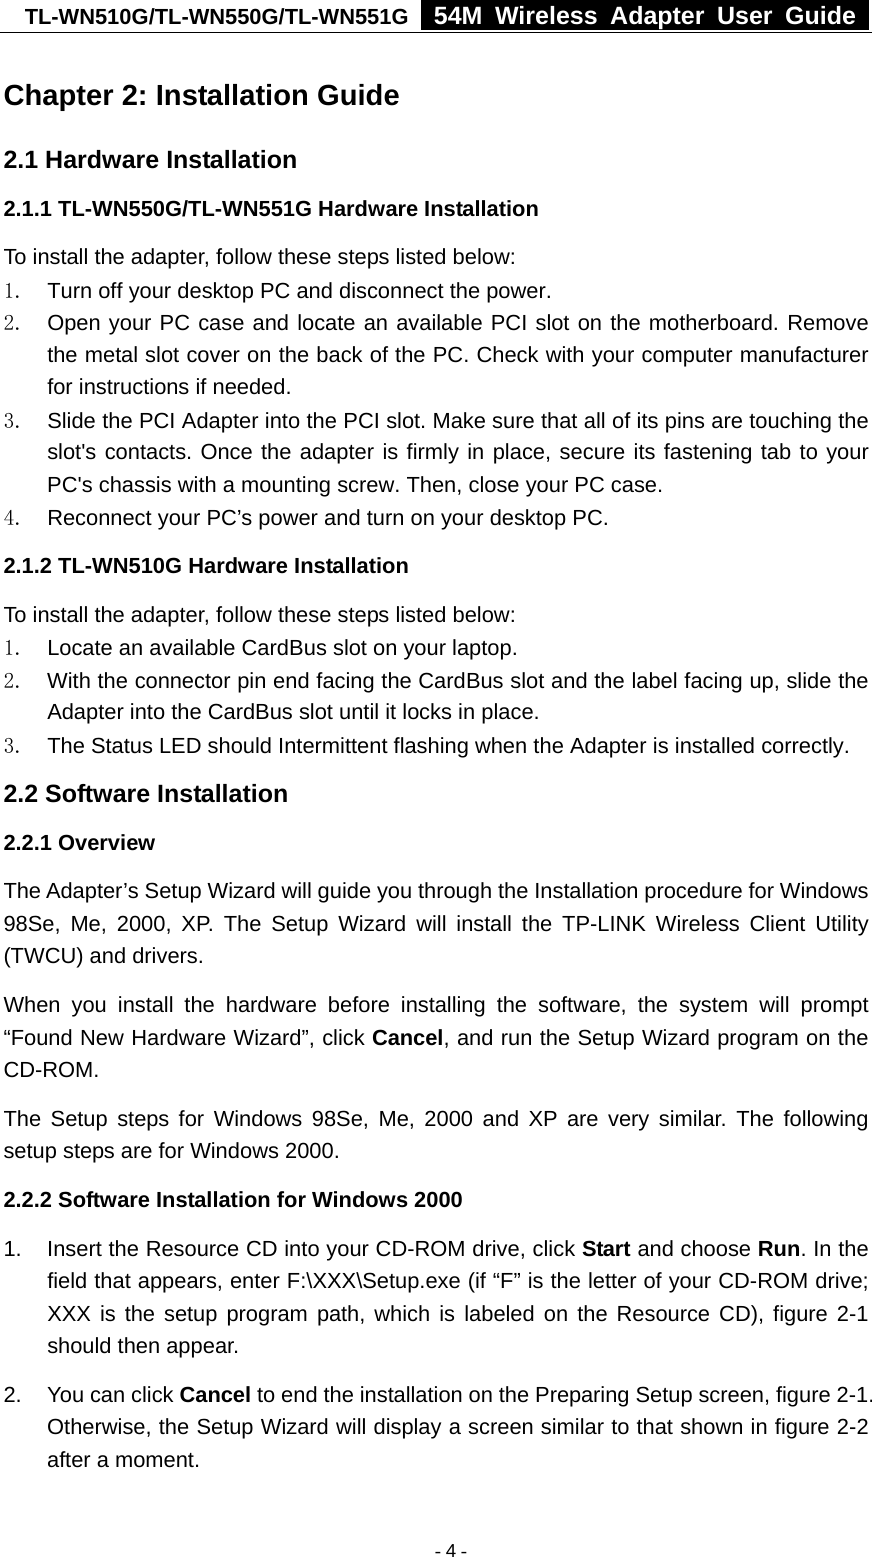 TL-WN510G/TL-WN550G/TL-WN551G  54M Wireless Adapter User Guide  Chapter 2: Installation Guide 2.1 Hardware Installation 2.1.1 TL-WN550G/TL-WN551G Hardware Installation To install the adapter, follow these steps listed below: 1.  Turn off your desktop PC and disconnect the power. 2.  Open your PC case and locate an available PCI slot on the motherboard. Remove the metal slot cover on the back of the PC. Check with your computer manufacturer for instructions if needed. 3.  Slide the PCI Adapter into the PCI slot. Make sure that all of its pins are touching the slot&apos;s contacts. Once the adapter is firmly in place, secure its fastening tab to your PC&apos;s chassis with a mounting screw. Then, close your PC case. 4.  Reconnect your PC’s power and turn on your desktop PC. 2.1.2 TL-WN510G Hardware Installation To install the adapter, follow these steps listed below: 1.  Locate an available CardBus slot on your laptop.   2.  With the connector pin end facing the CardBus slot and the label facing up, slide the Adapter into the CardBus slot until it locks in place. 3.  The Status LED should Intermittent flashing when the Adapter is installed correctly. 2.2 Software Installation 2.2.1 Overview The Adapter’s Setup Wizard will guide you through the Installation procedure for Windows 98Se, Me, 2000, XP. The Setup Wizard will install the TP-LINK Wireless Client Utility (TWCU) and drivers. When you install the hardware before installing the software, the system will prompt “Found New Hardware Wizard”, click Cancel, and run the Setup Wizard program on the CD-ROM.  The Setup steps for Windows 98Se, Me, 2000 and XP are very similar. The following setup steps are for Windows 2000. 2.2.2 Software Installation for Windows 2000 1.  Insert the Resource CD into your CD-ROM drive, click Start and choose Run. In the field that appears, enter F:\XXX\Setup.exe (if “F” is the letter of your CD-ROM drive; XXX is the setup program path, which is labeled on the Resource CD), figure 2-1 should then appear. 2.  You can click Cancel to end the installation on the Preparing Setup screen, figure 2-1. Otherwise, the Setup Wizard will display a screen similar to that shown in figure 2-2 after a moment.  - 4 -